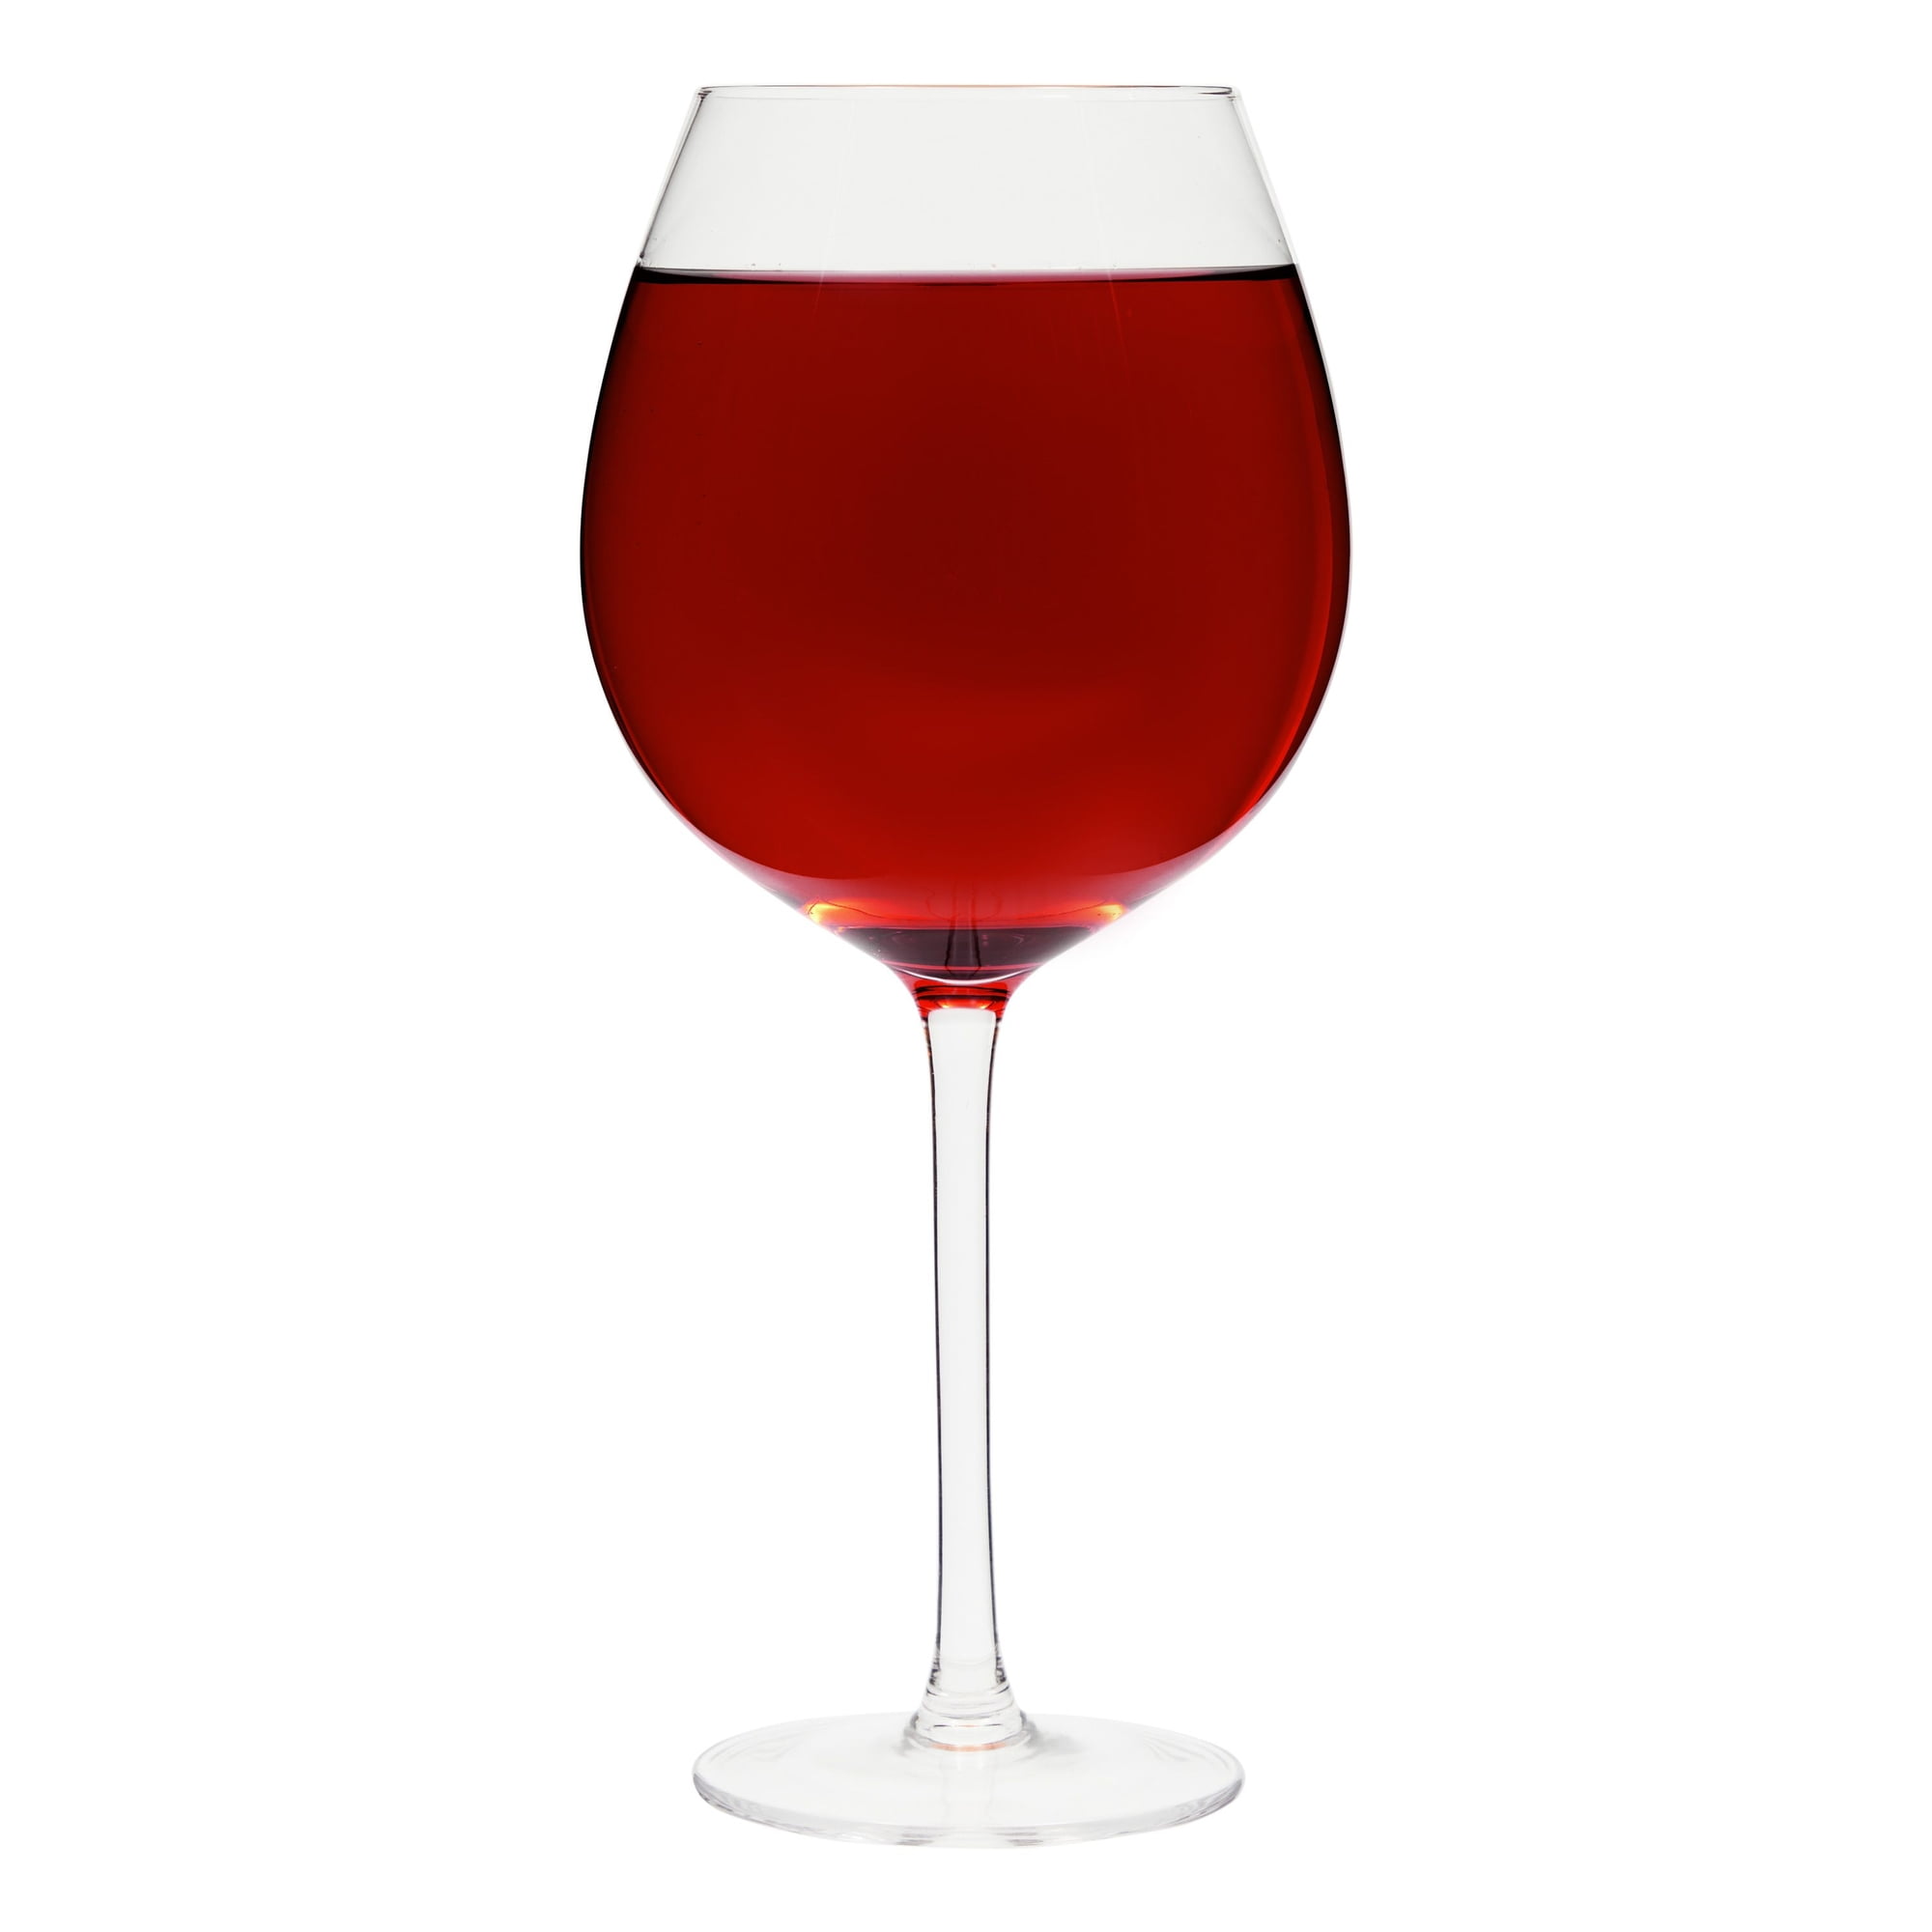 You Can Get A Giant Wine Glass For Those Times You Just Need A